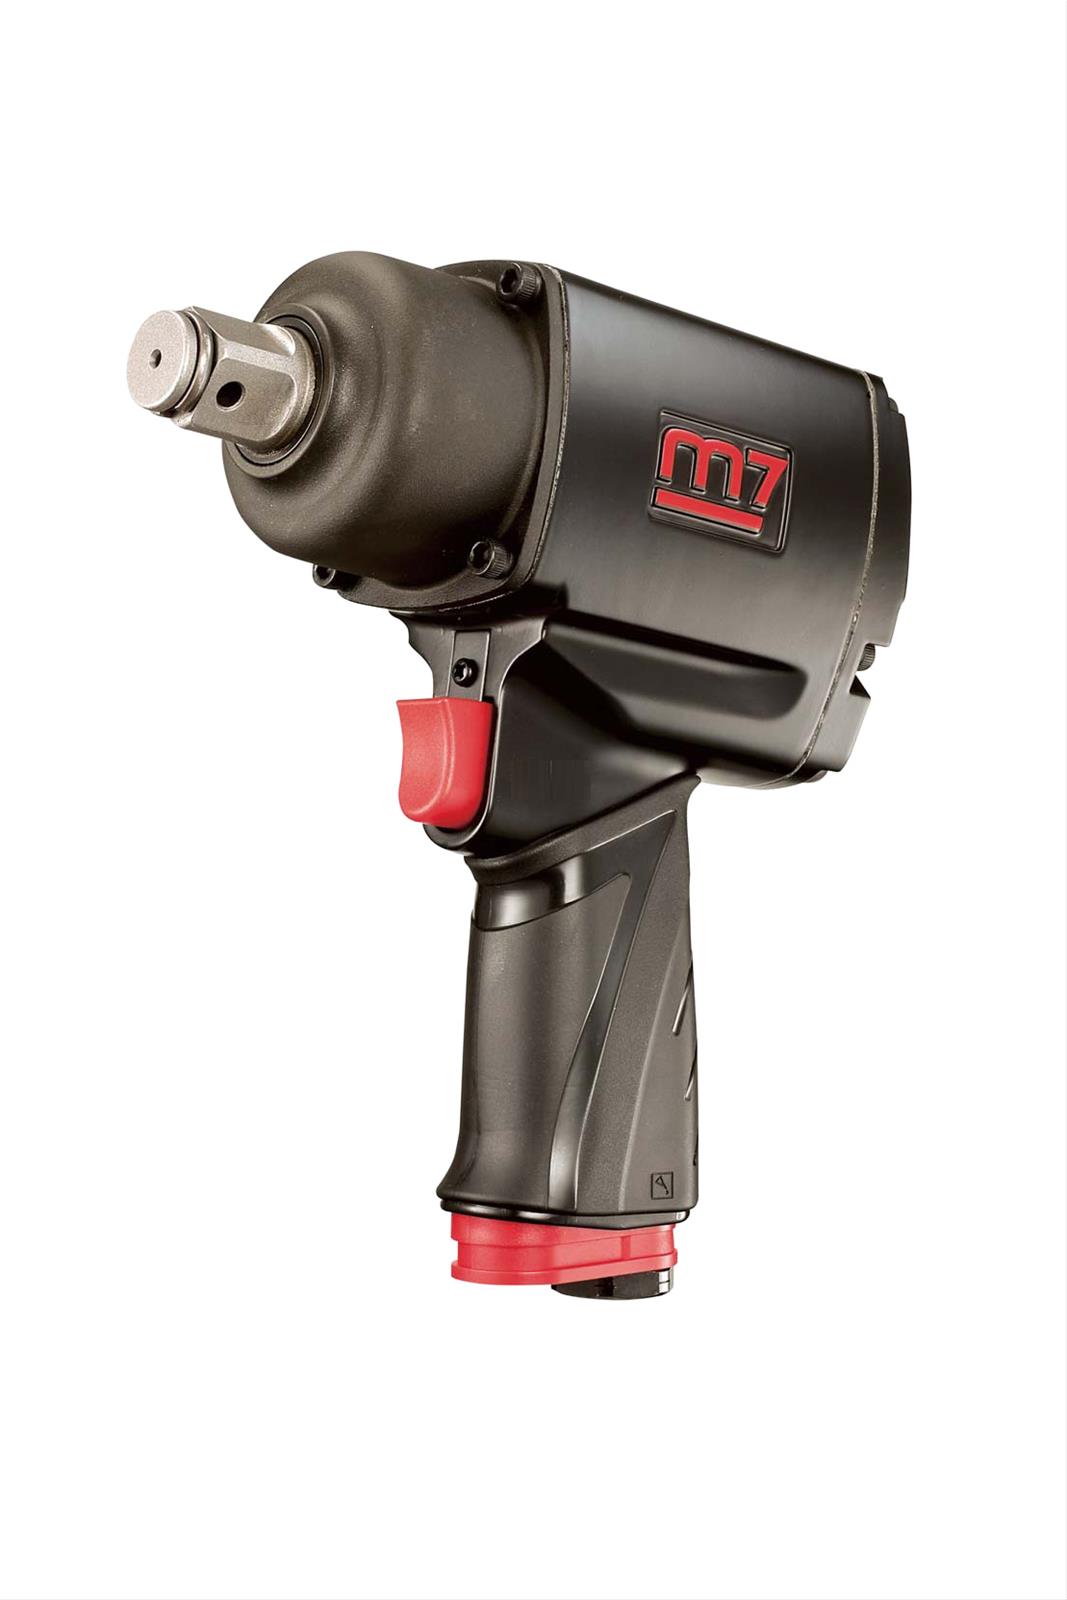 Mighty Seven NC-6236Q 3/4 Impact Wrench